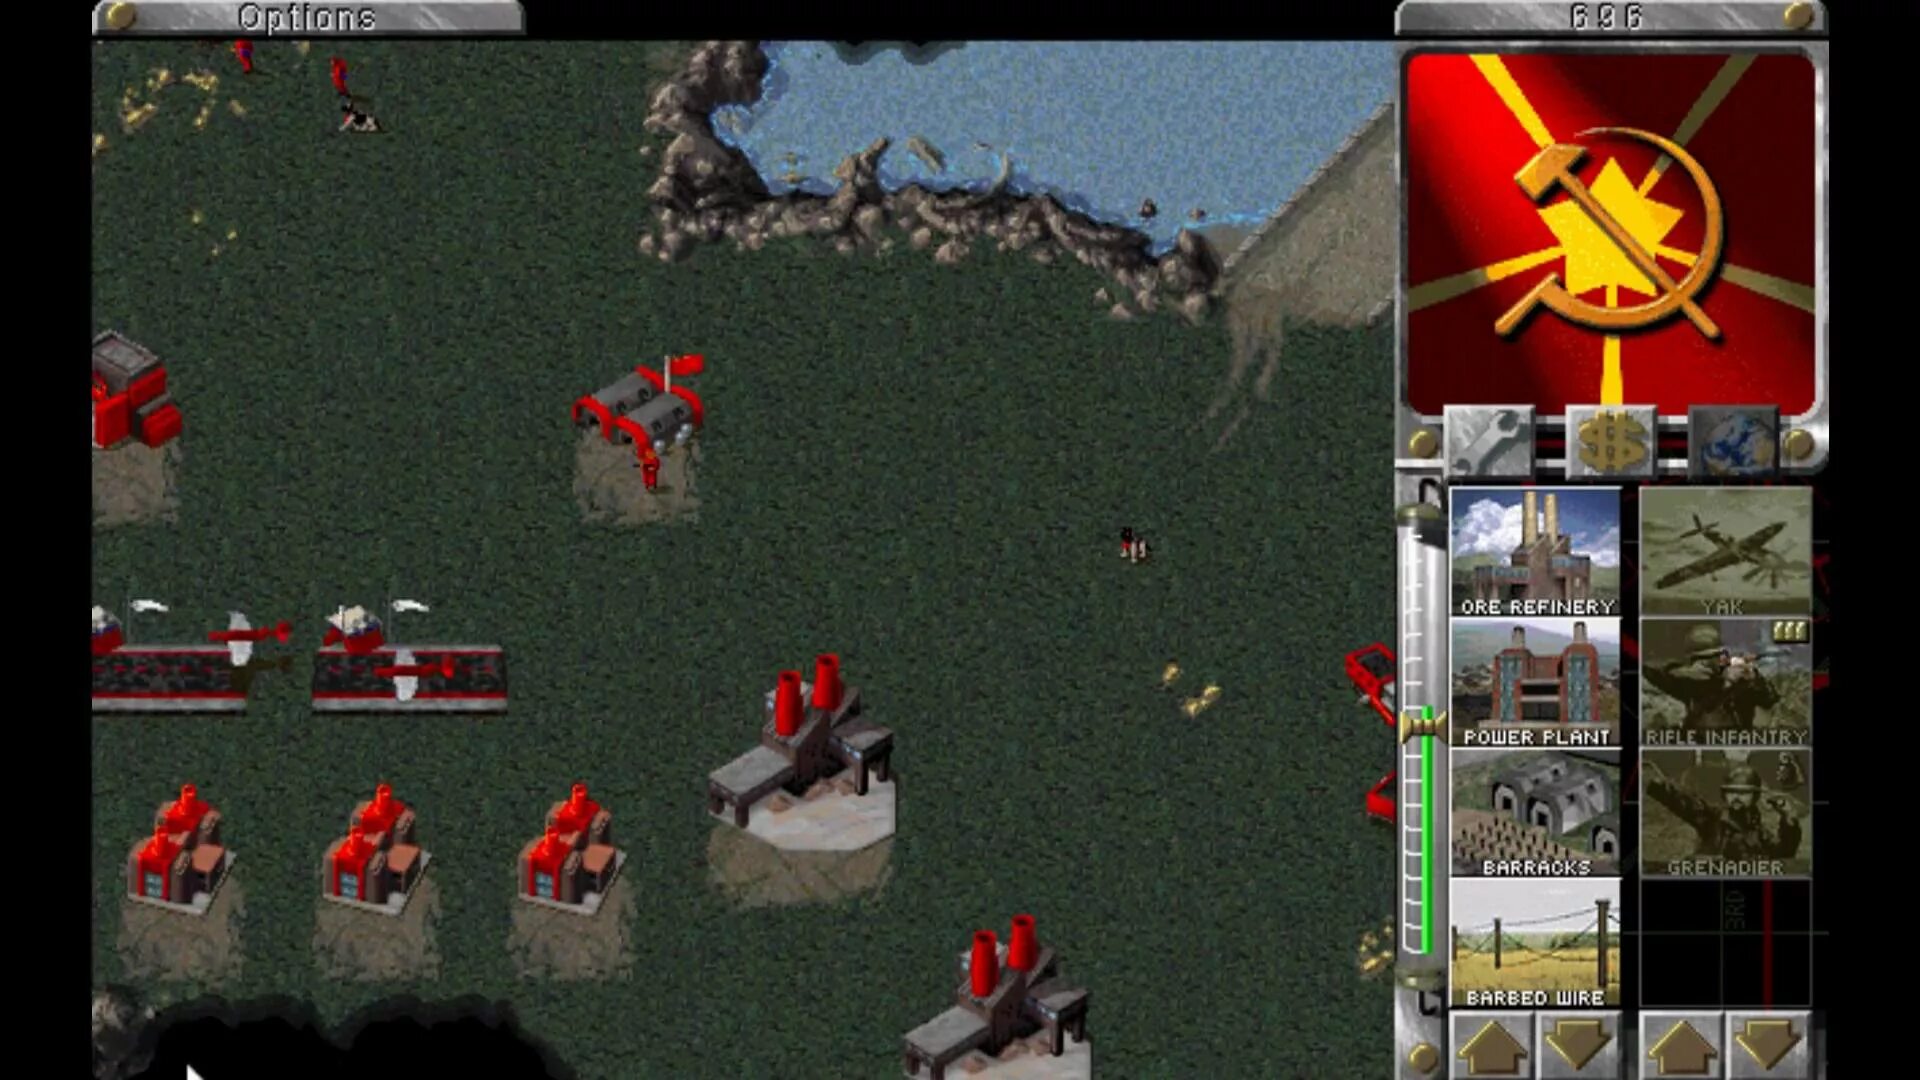 Игра Red Alert 1. Command and Conquer 1996. Red Alert Sony PLAYSTATION 1. Стратегия Red Alert 1. Игры ред стар